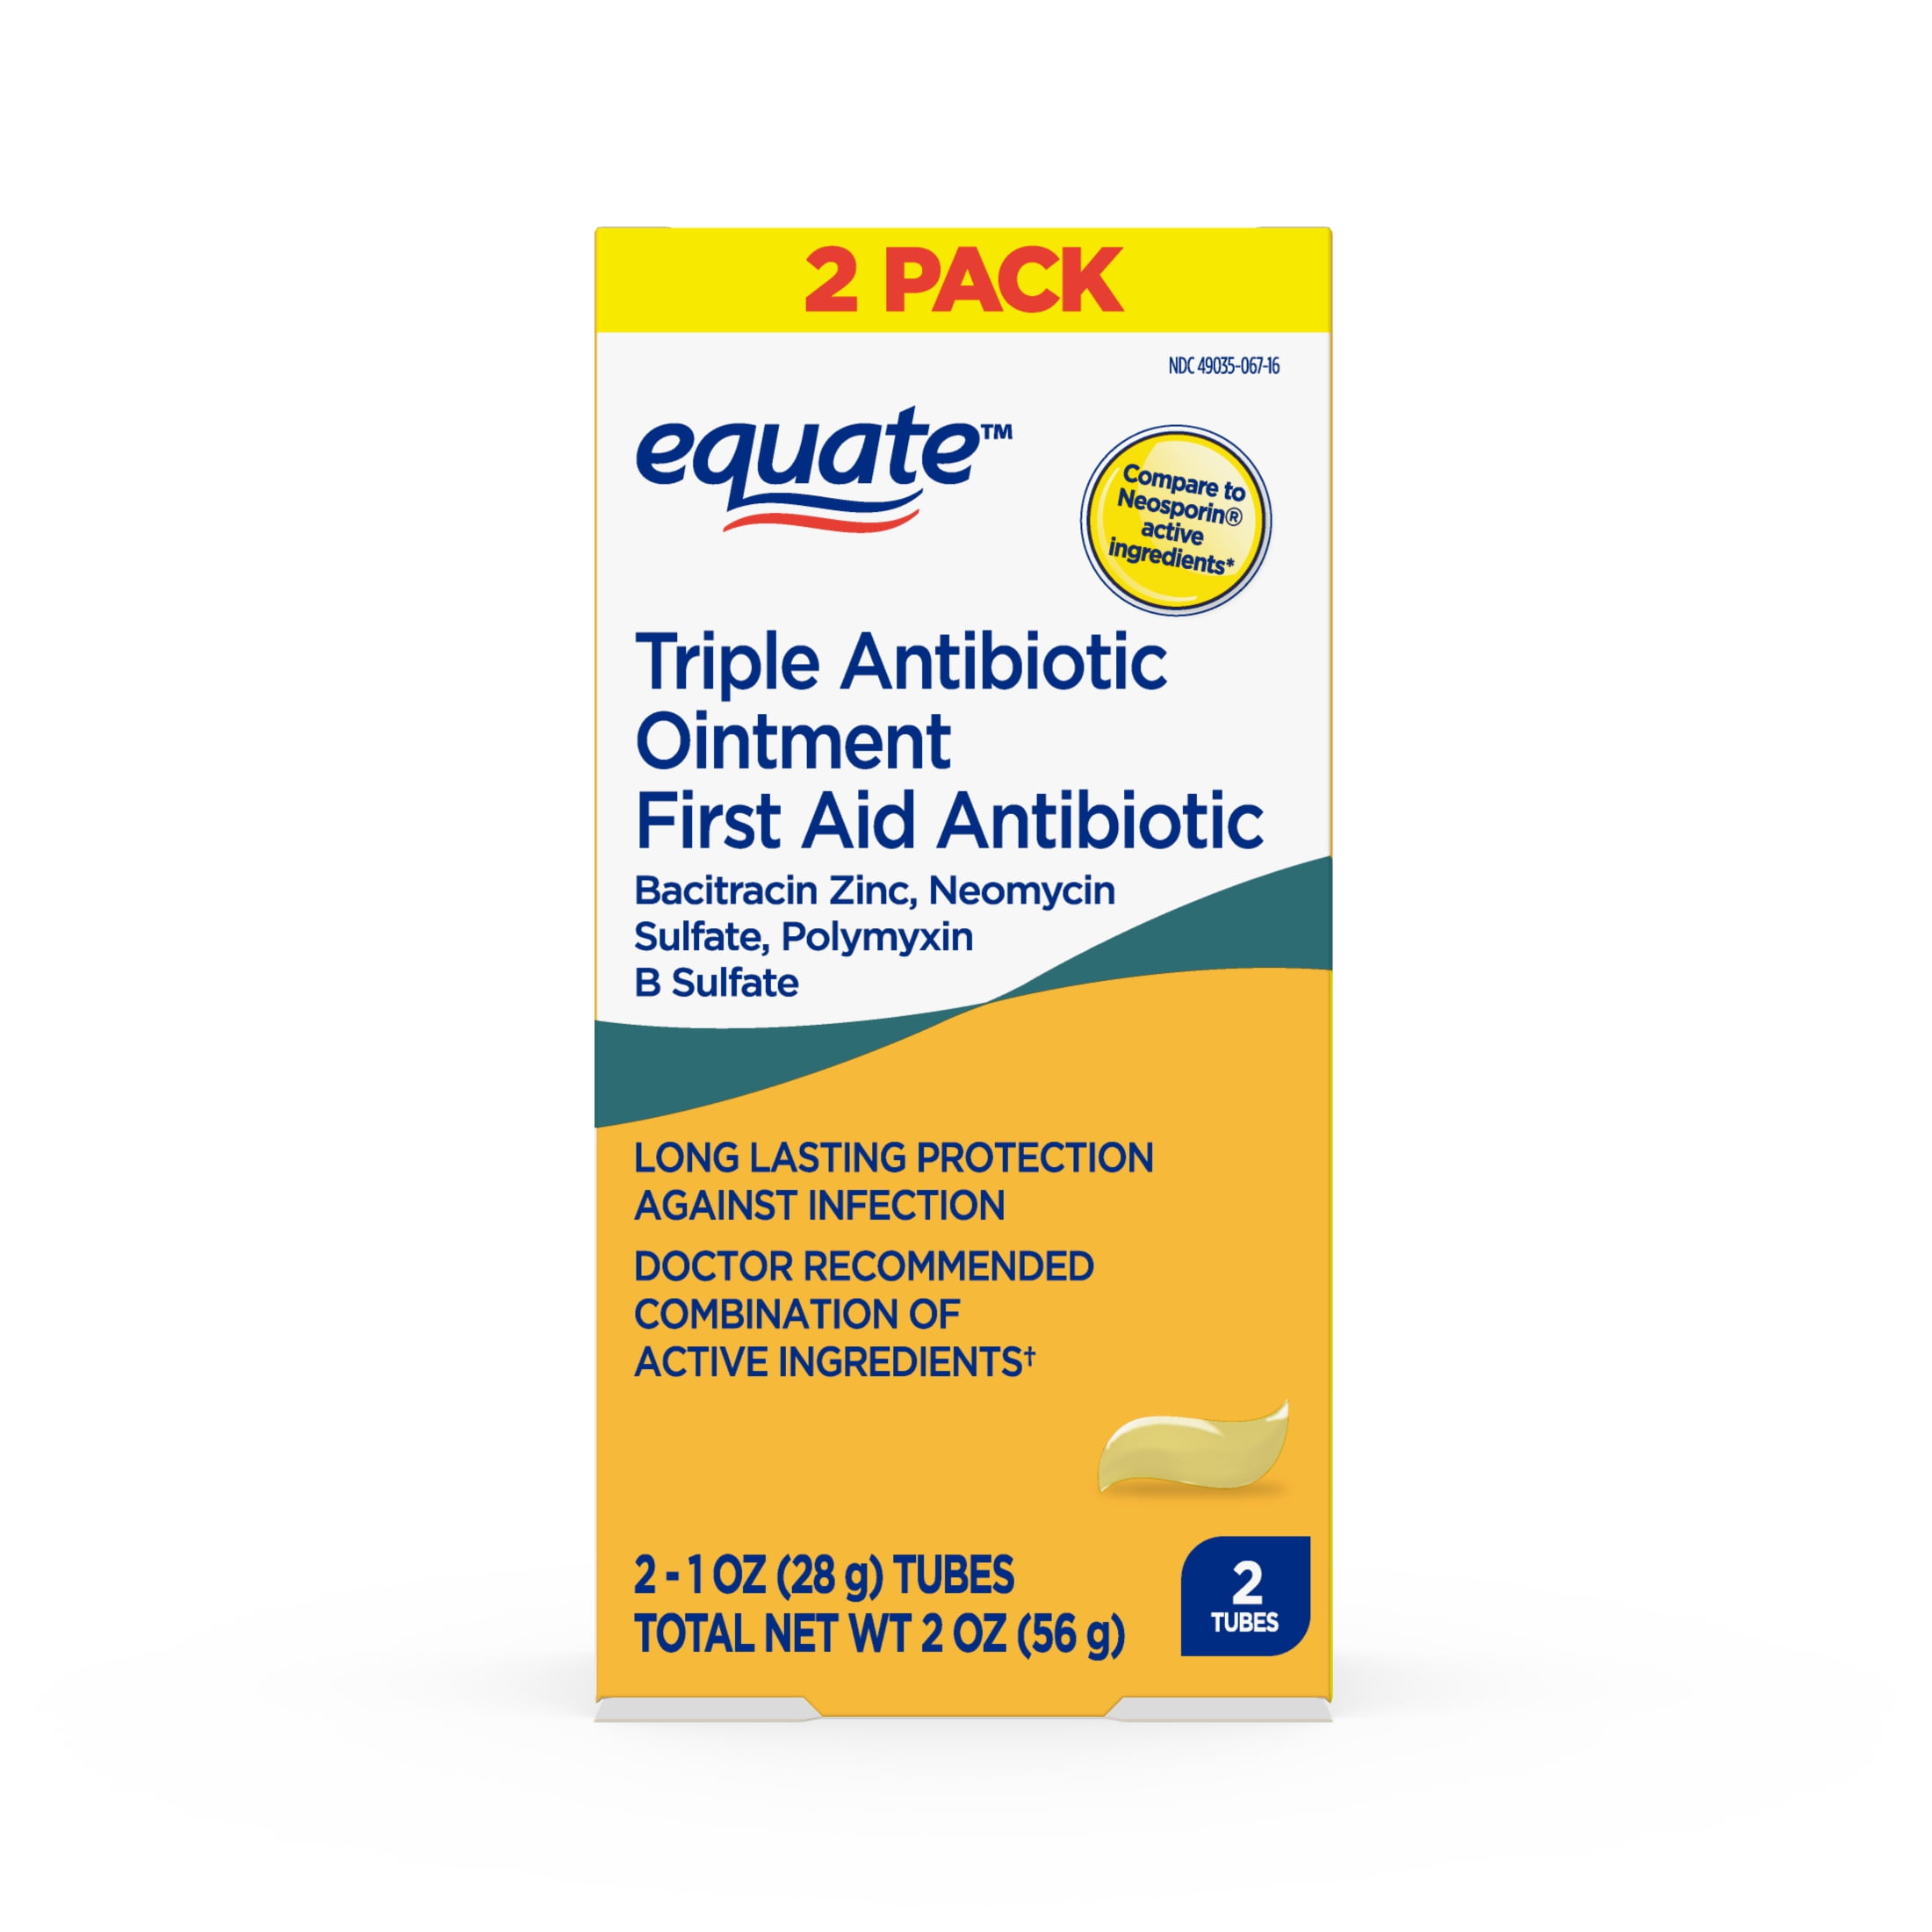 Equate First Aid Triple Antibiotic Ointment, Infection Protection, 2 oz, 2 Pack